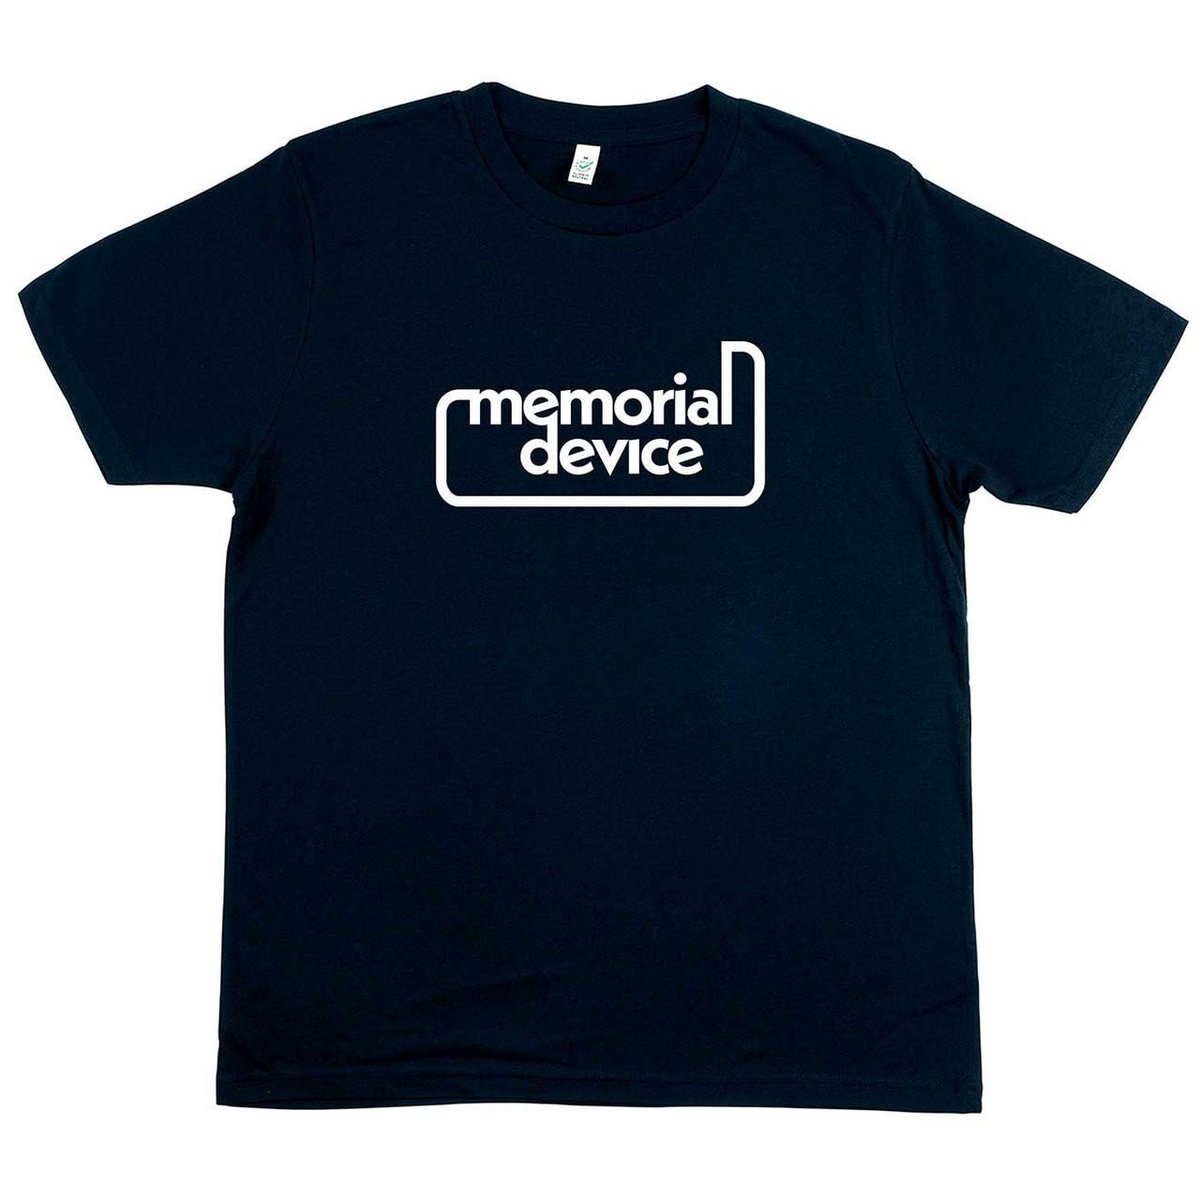 Big week down the rabbit hole... 🌙 Announced @MoonZappa's memoir, out in August 🎛️ Published the new book from @SimonRetromania 📓 Paperbacks of @DanielRachel69's book on 2 Tone arrived 👕 And we were first in line for a Memorial Device tshirt...